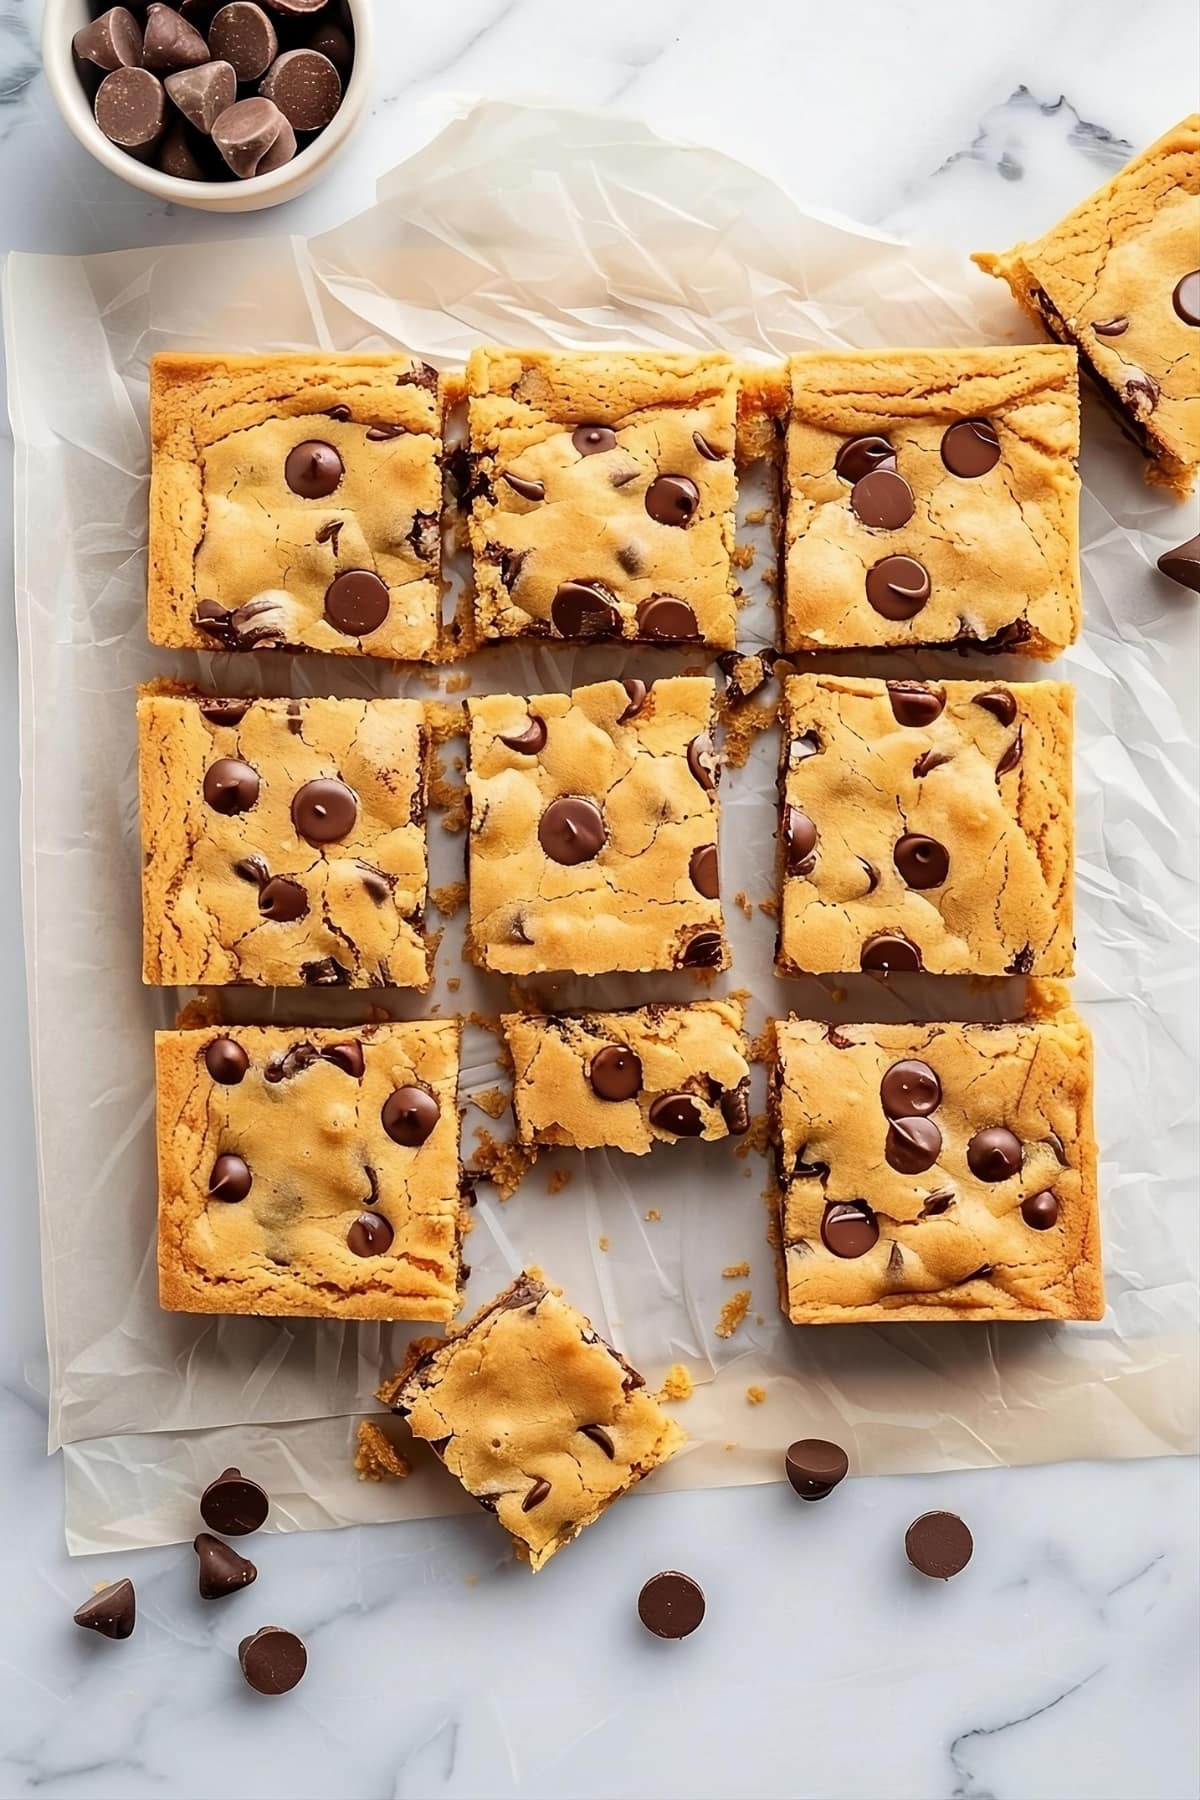 Sliced cake mix chocolate chip cookie bars on a parchment paper on a white marble surface.